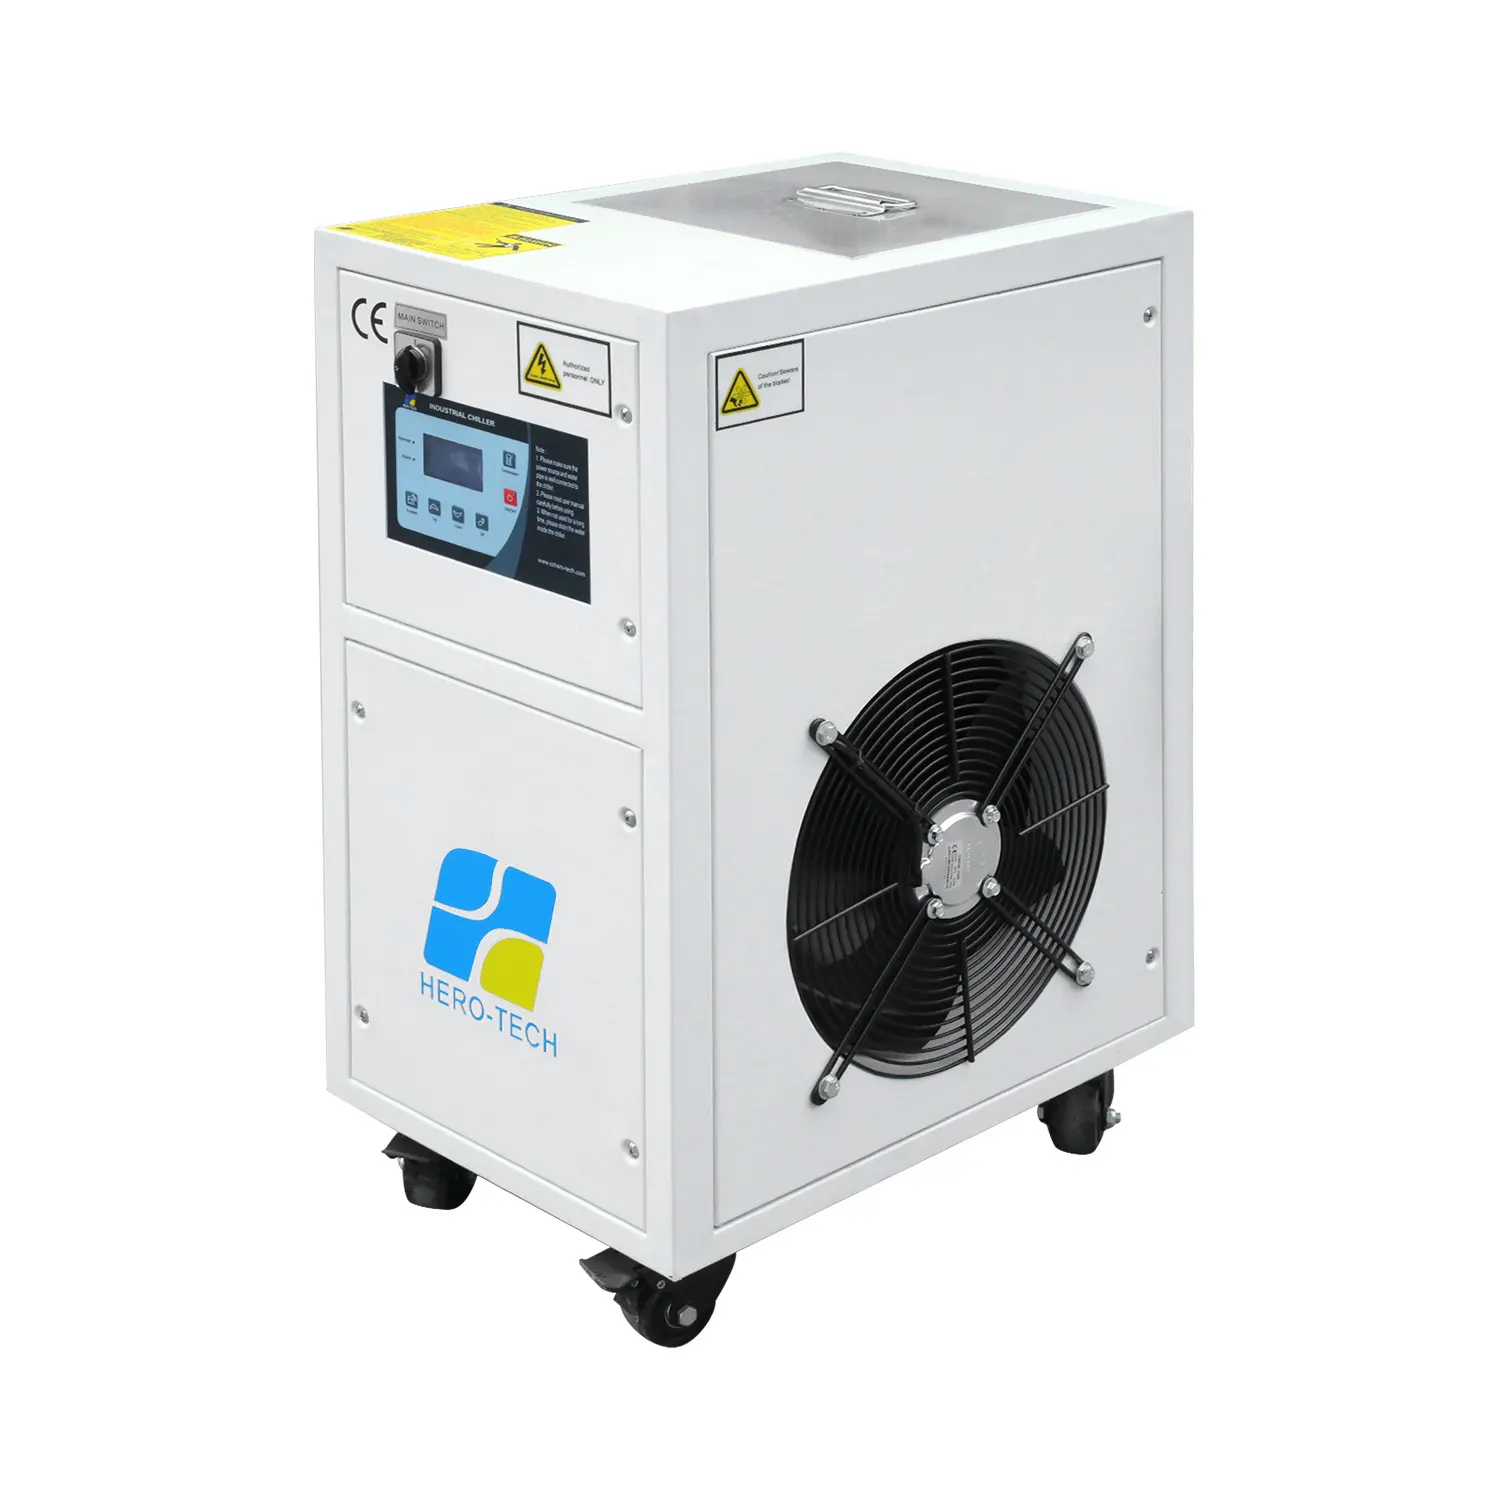 Chiller Portable ac reviews Small Air Cooled Chiller unit 2kw water cooler machine